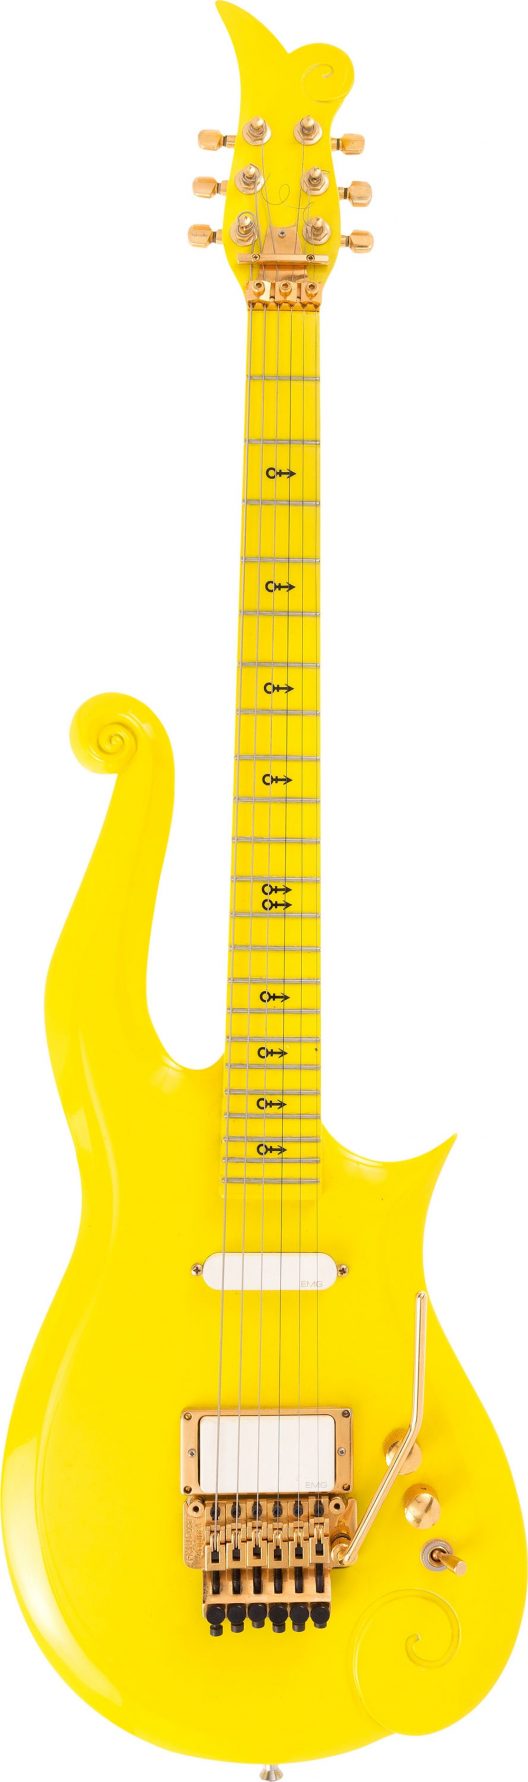 Heritage Auctions To Offer Prince’s Iconic Yellow Cloud Guitar